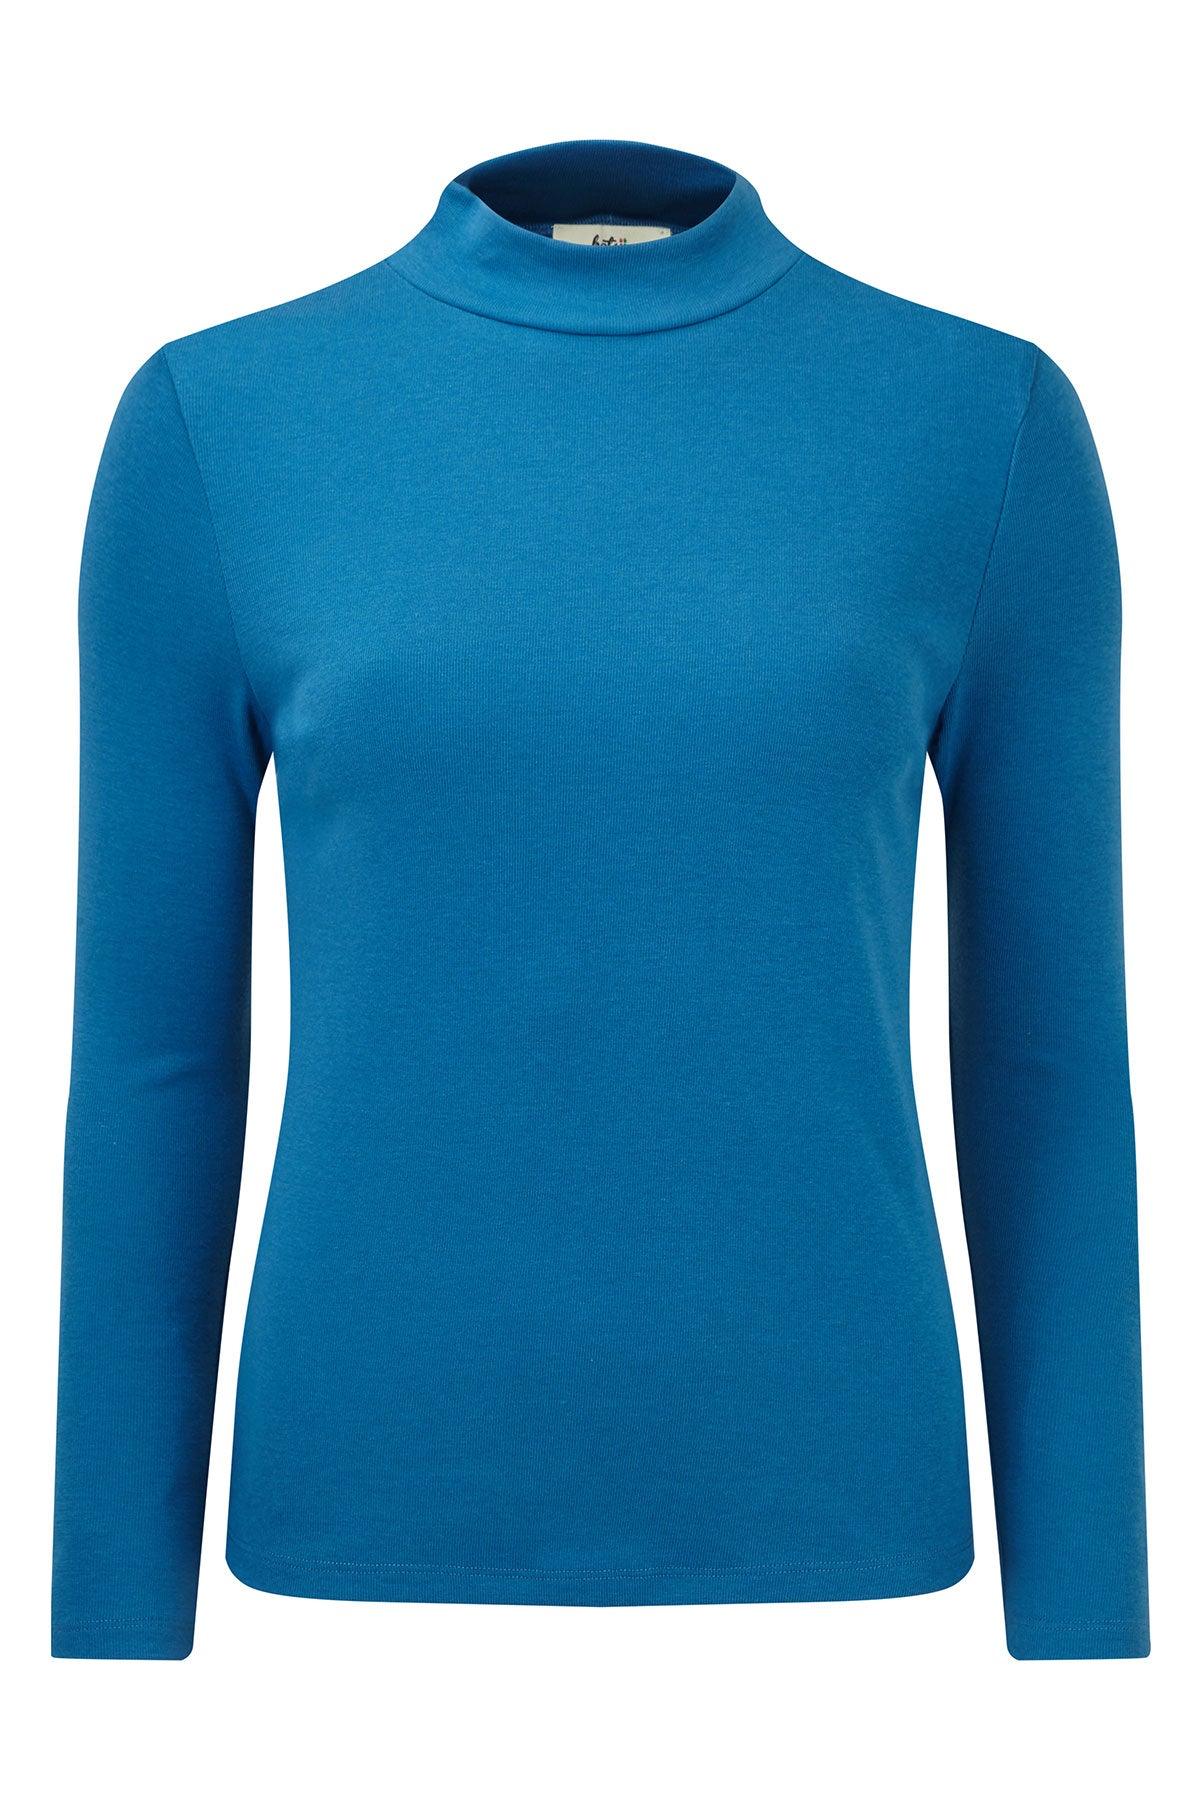 Betsy Turtle Neck Top (Sapphire)